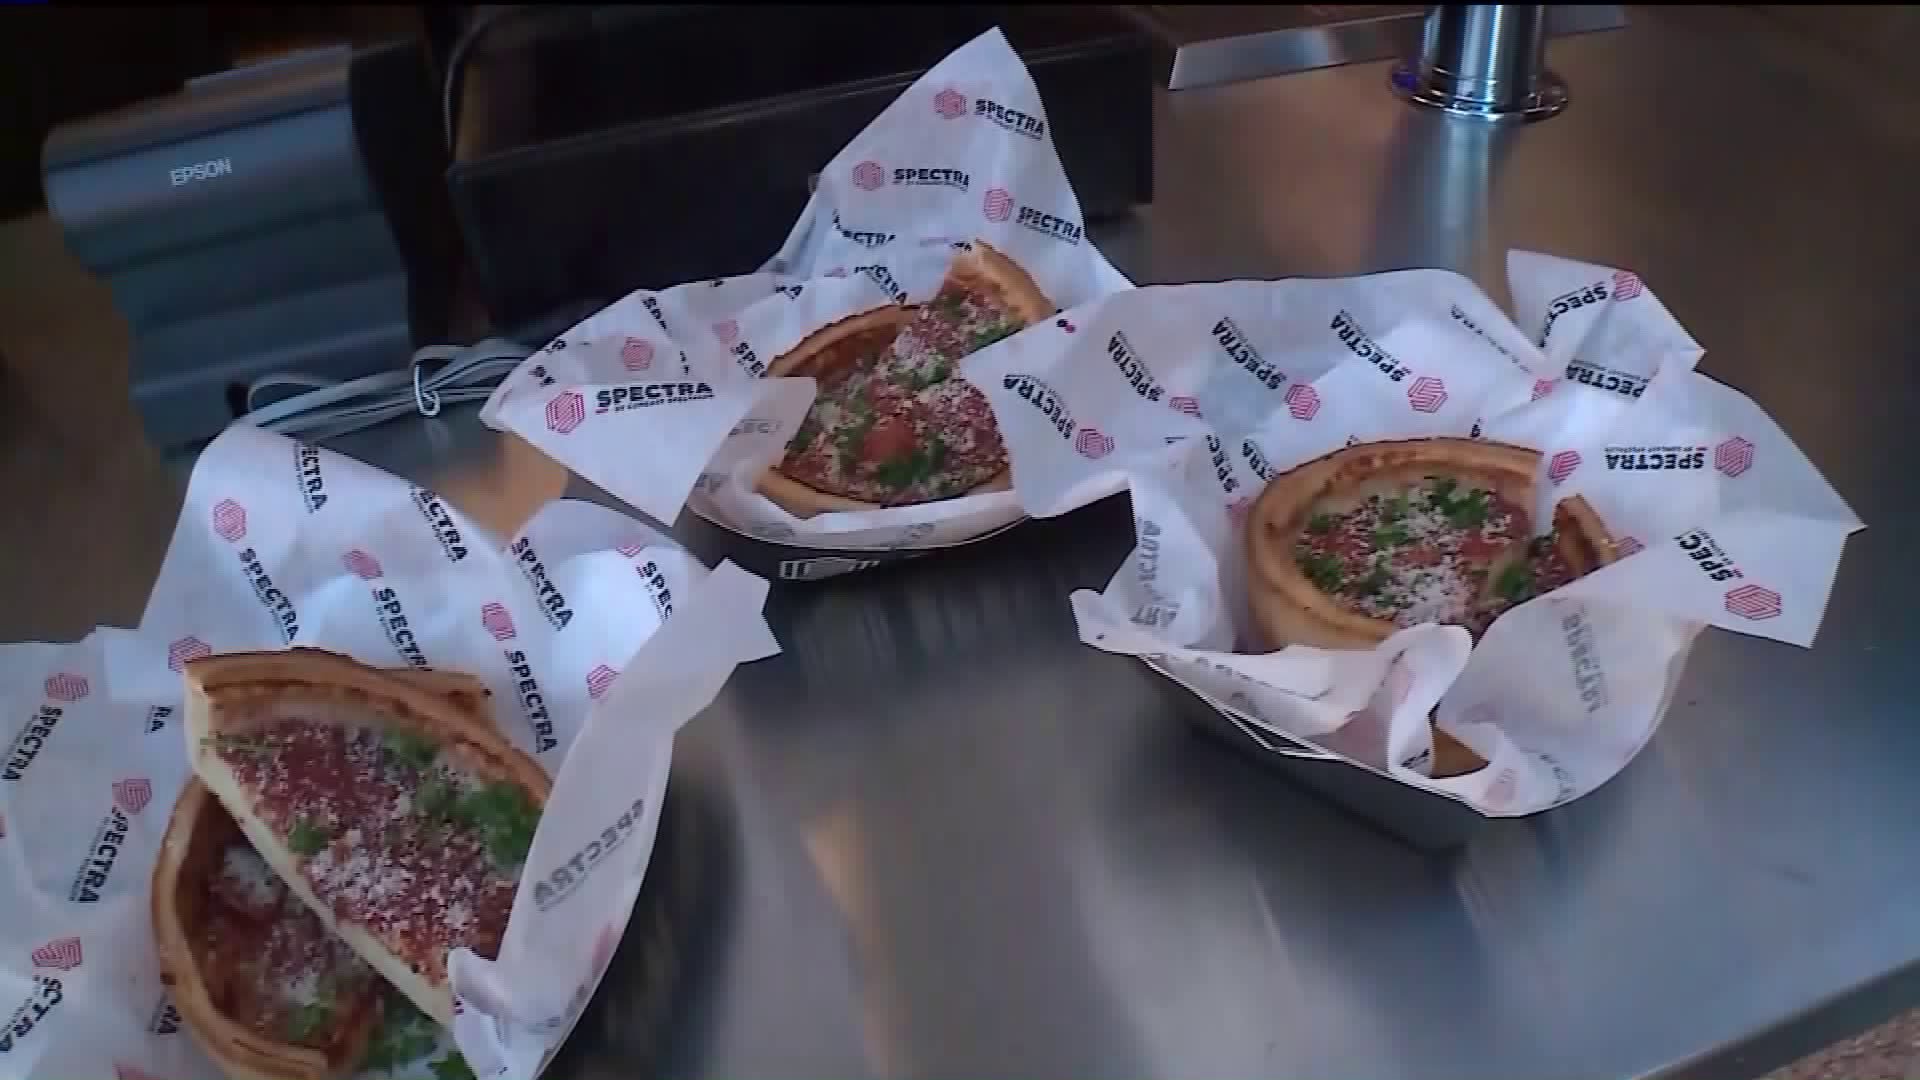 Ana On The Road: Inside Sloan Park, cool Cubs merch and Gio’s delicious eats